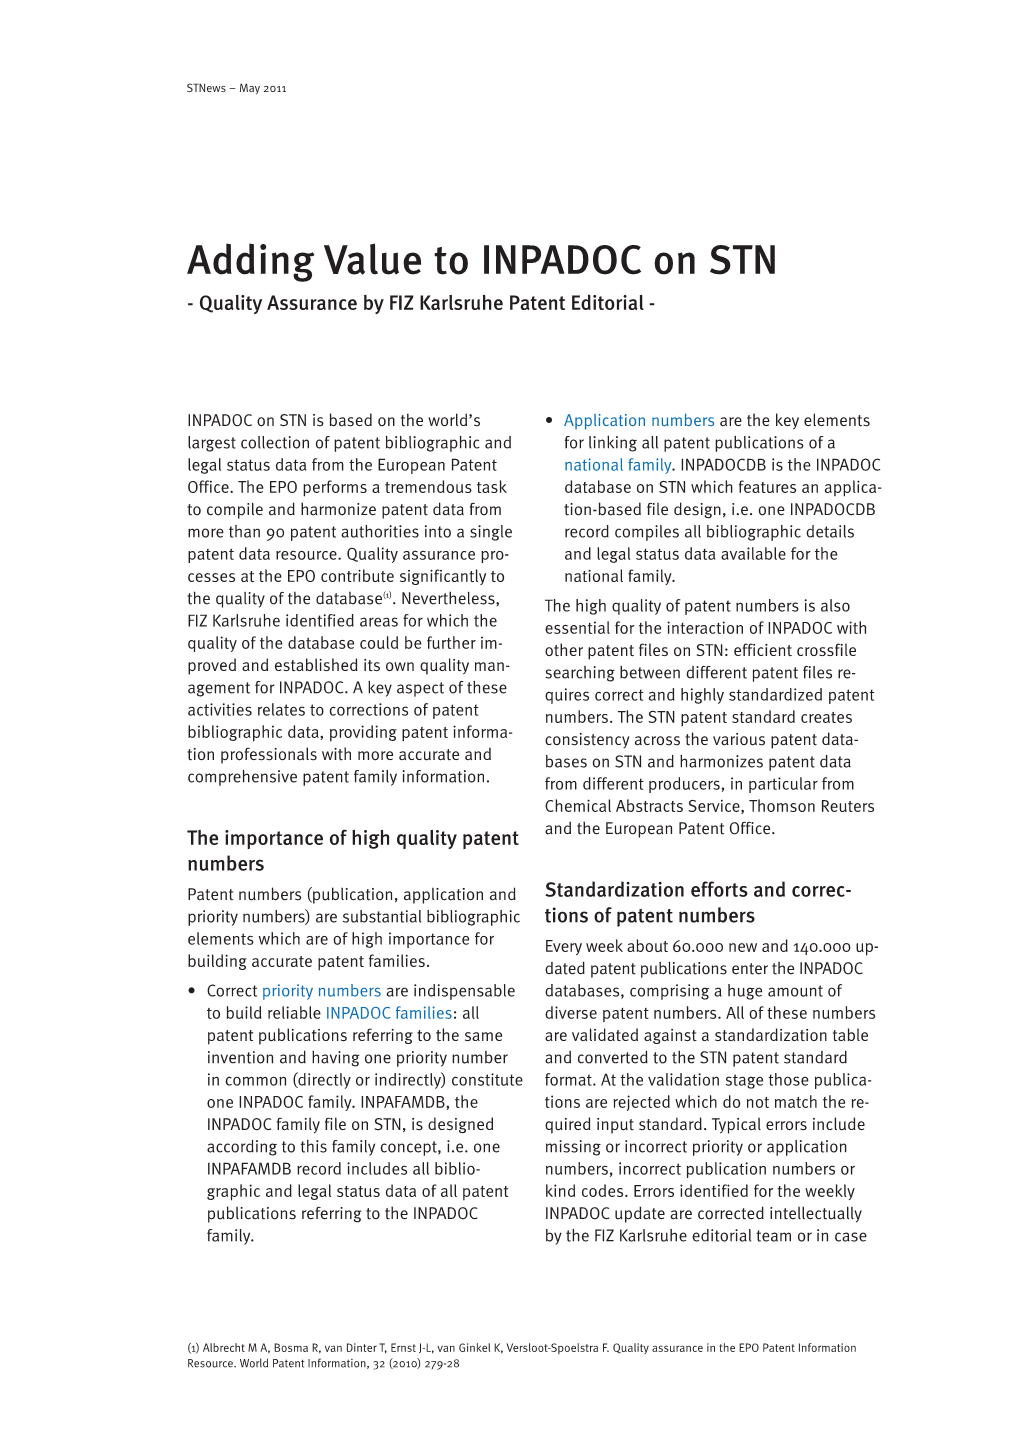 Adding Value to INPADOC on STN - Quality Assurance by FIZ Karlsruhe Patent Editorial